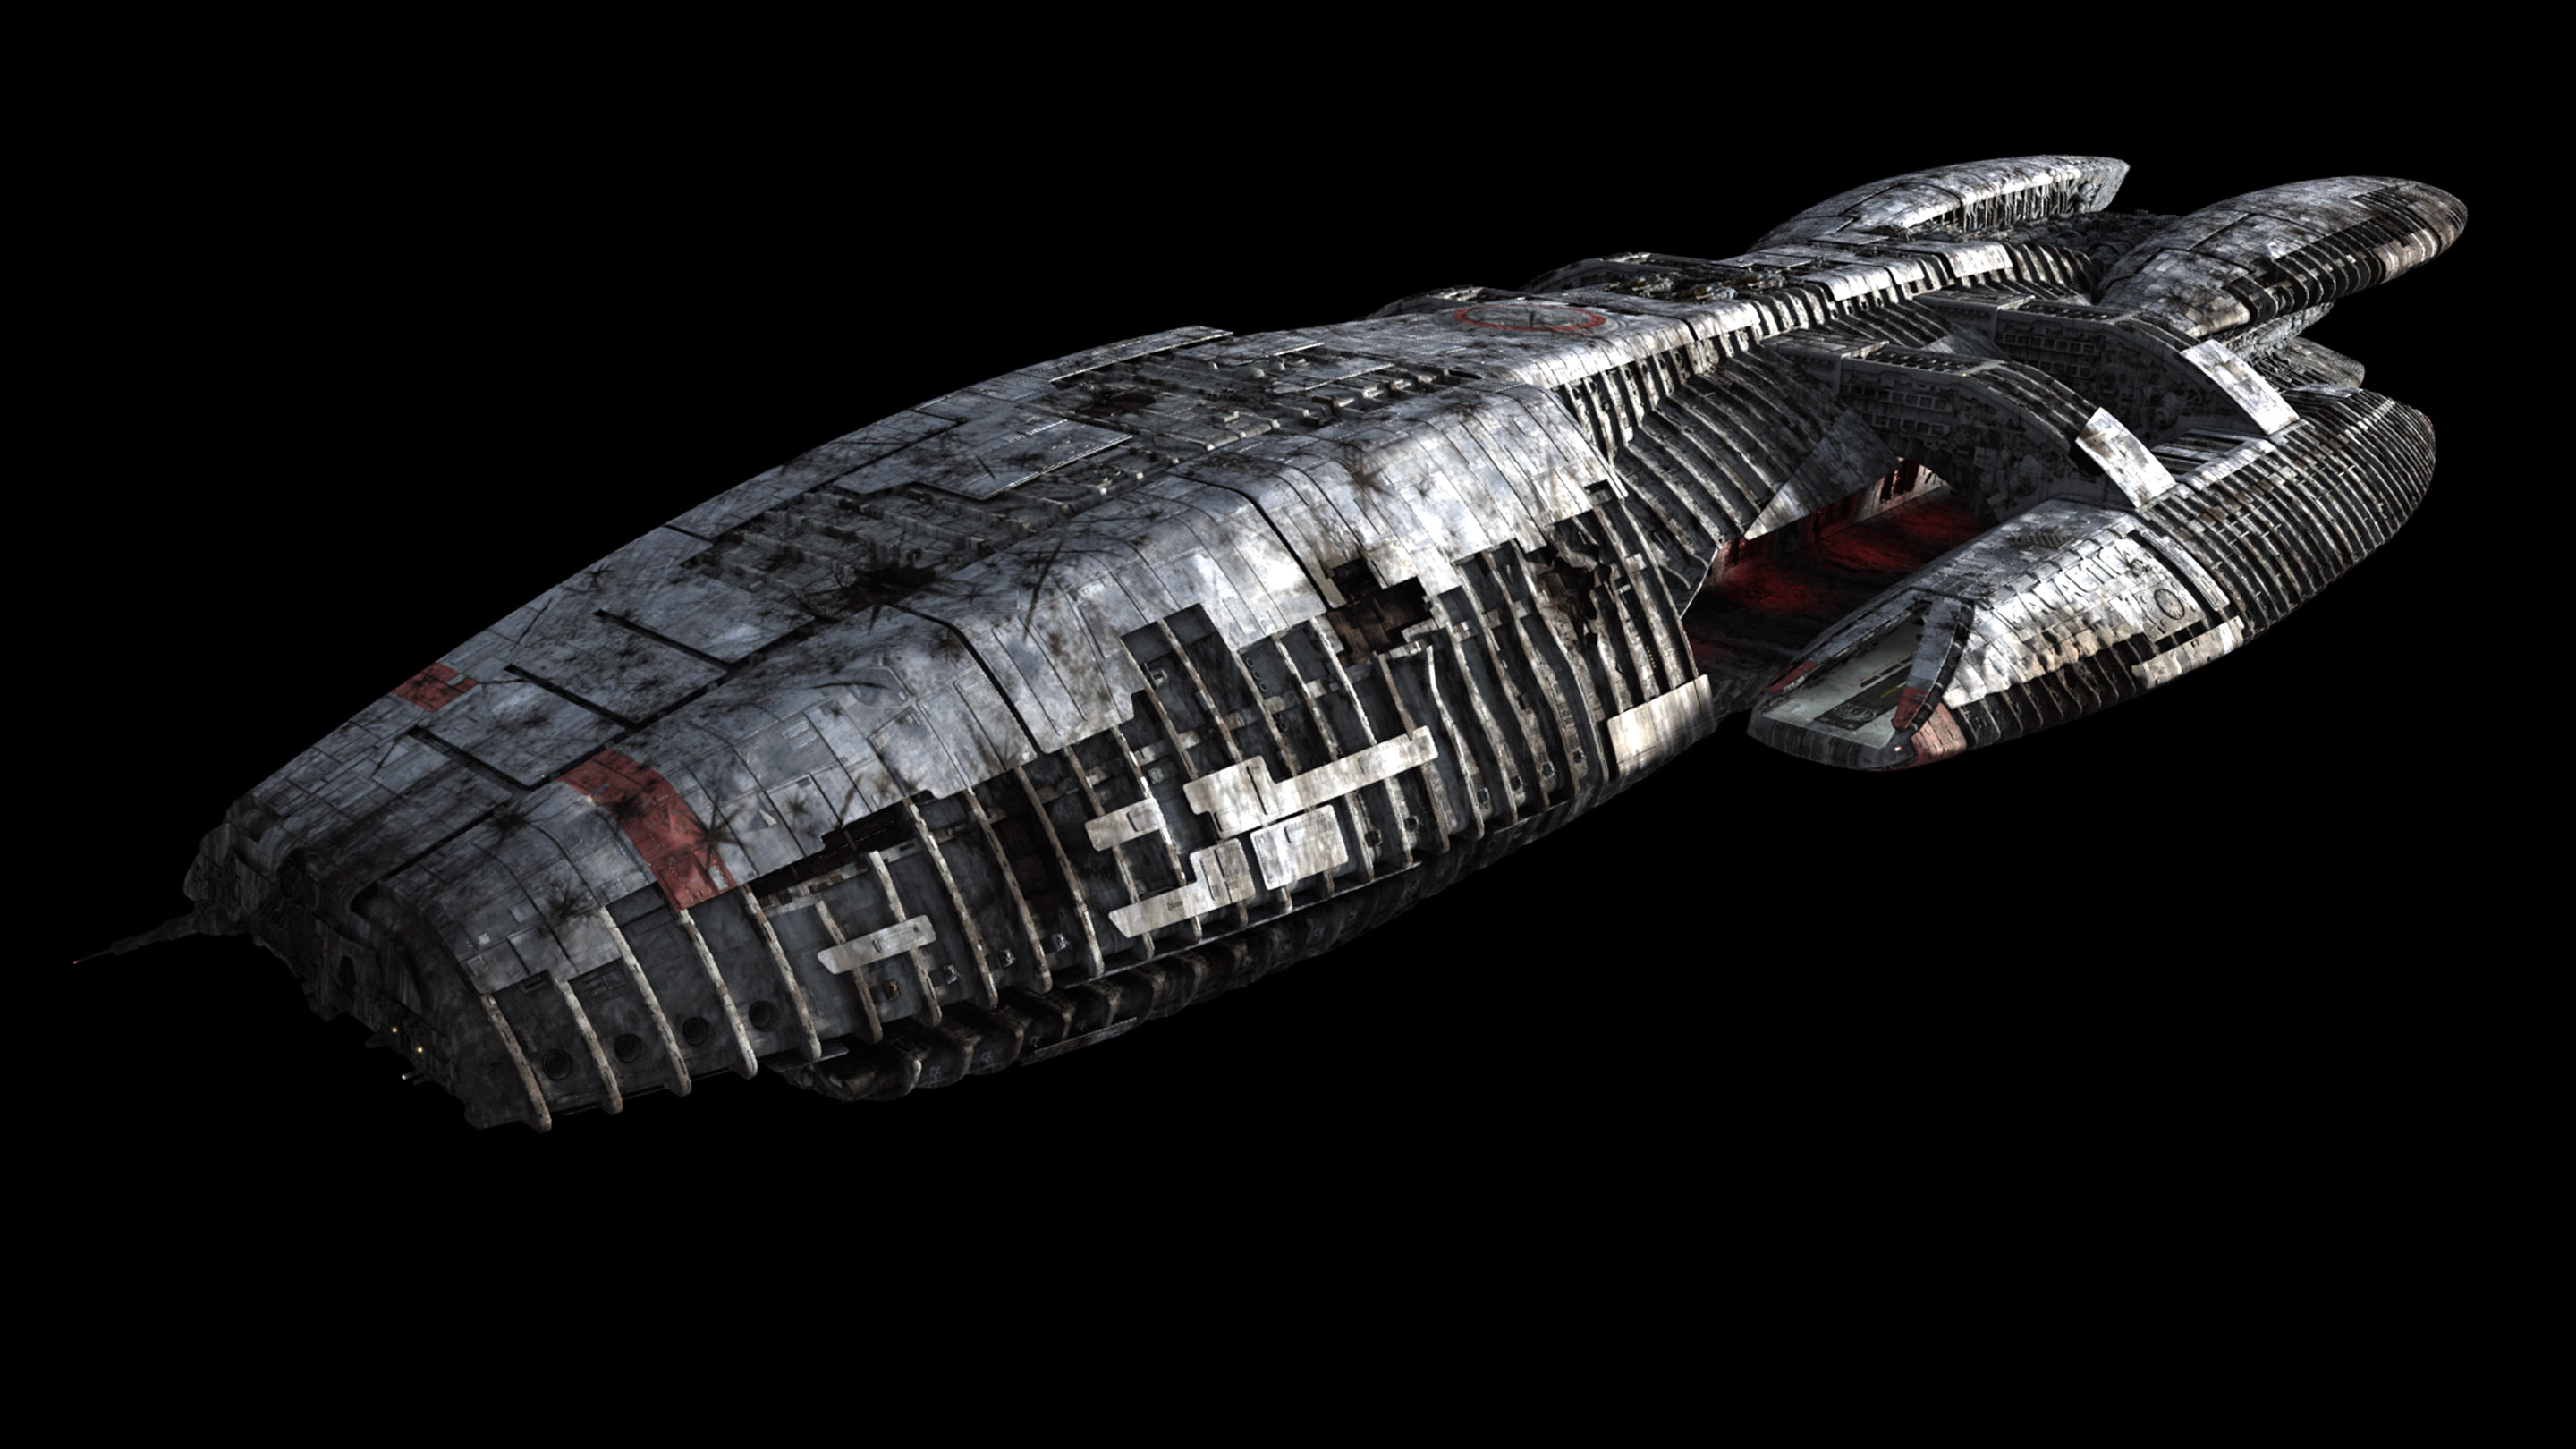 These Battlestar Galactica Image You Can Use It As Your Wallpaper Etc